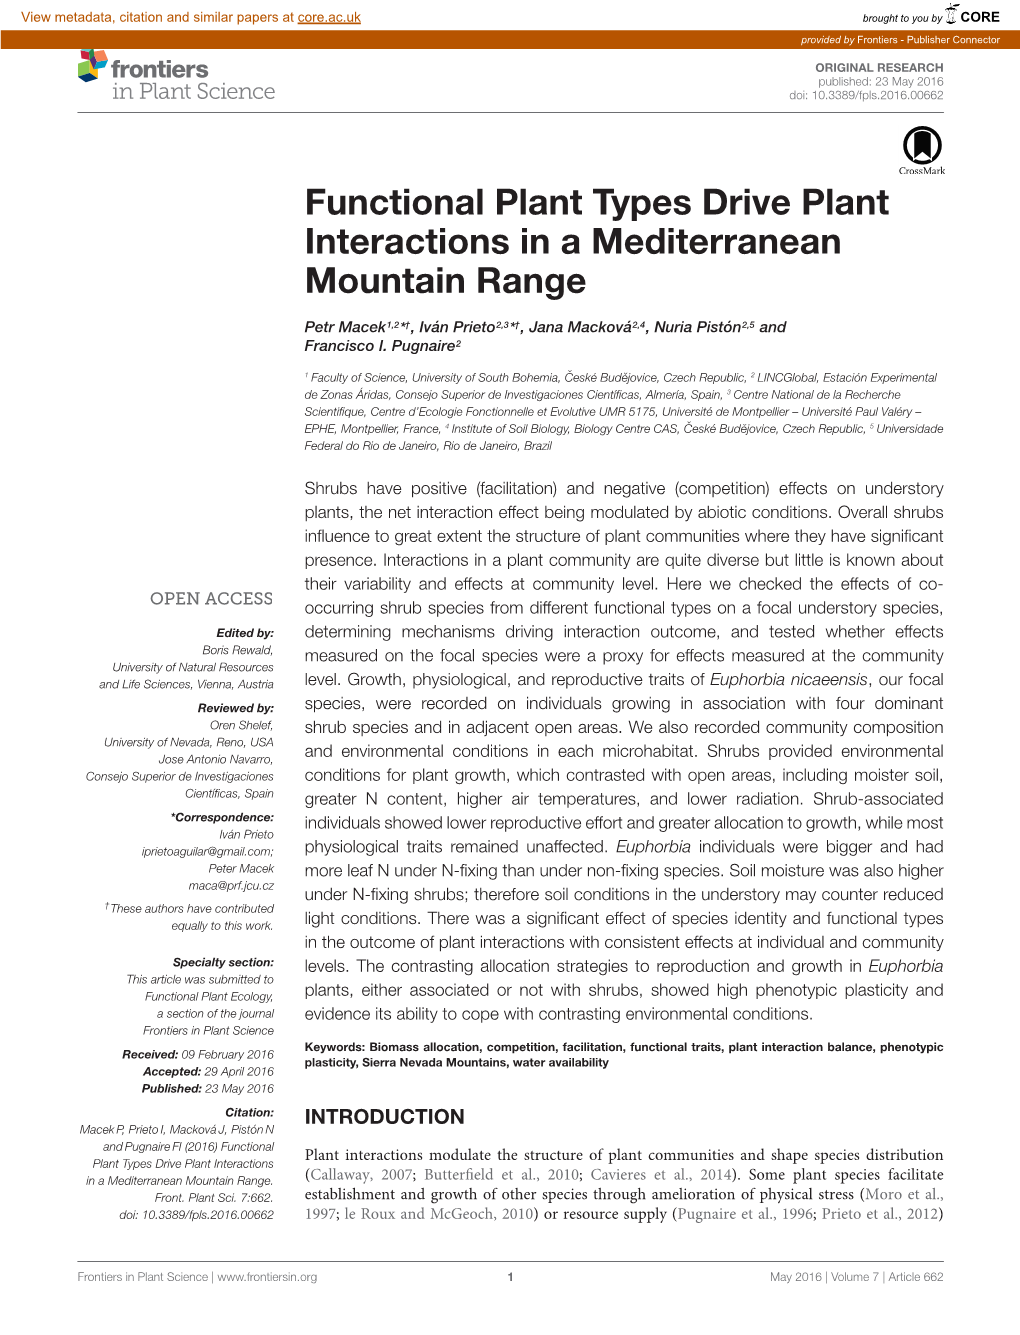 Functional Plant Types Drive Plant Interactions in a Mediterranean Mountain Range